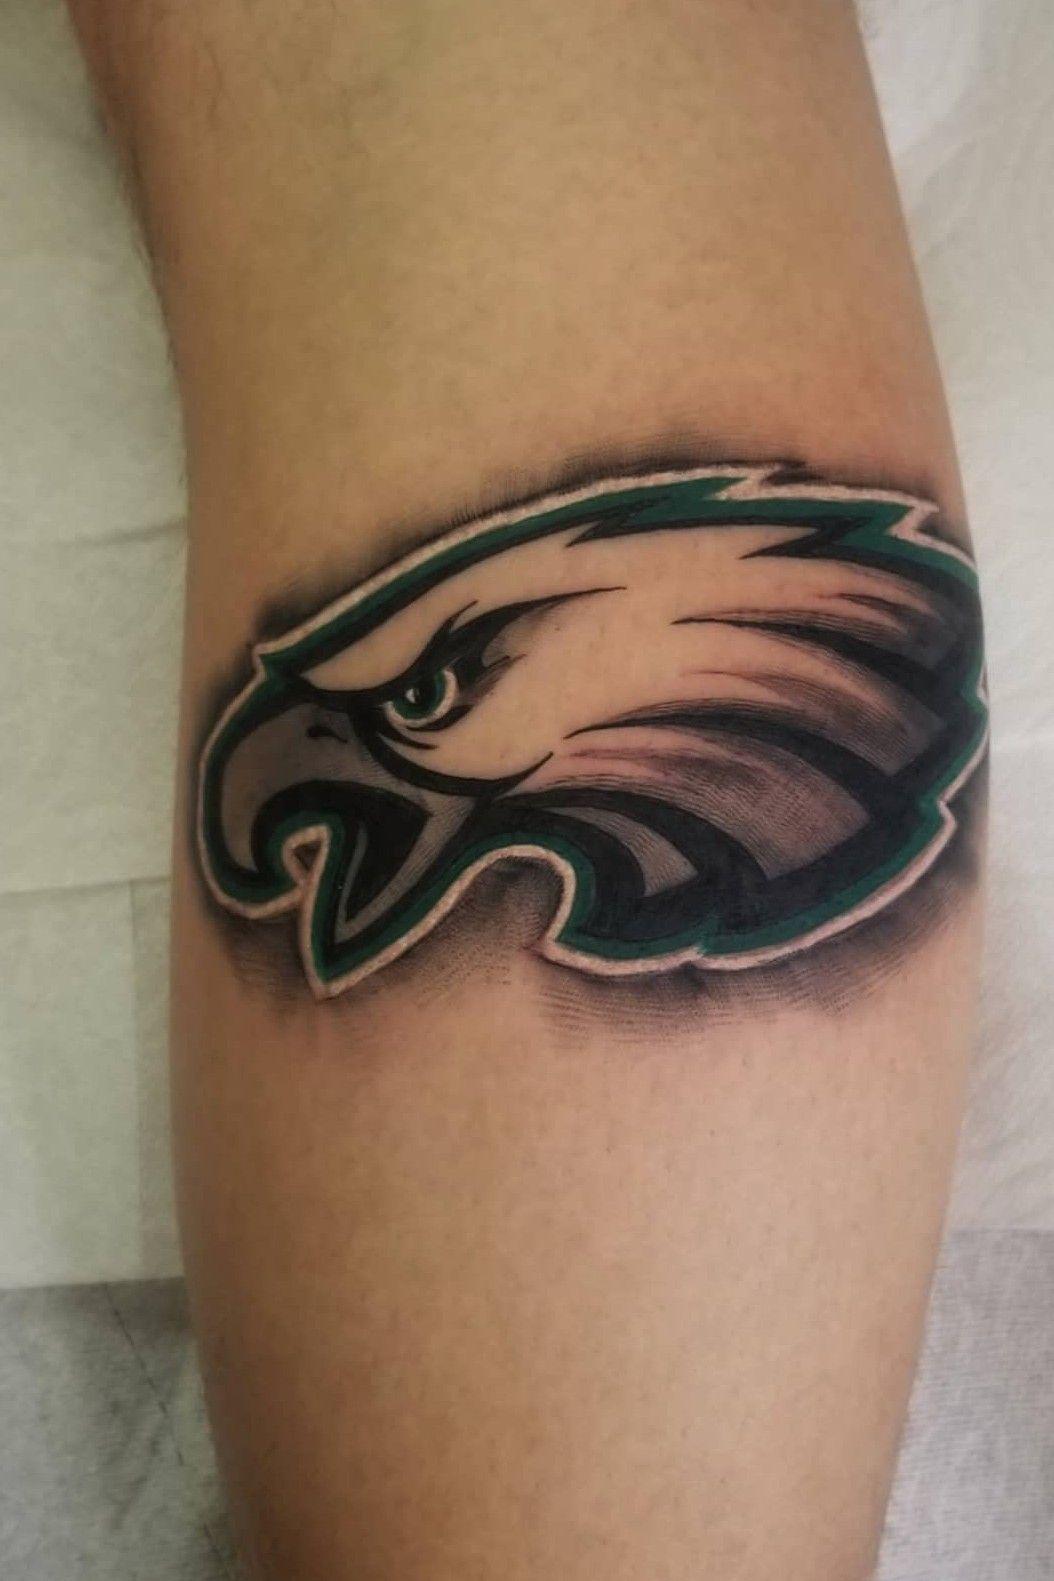 Sussex County Residents Show Team Love with Eagles Tattoos  News  wrdecom